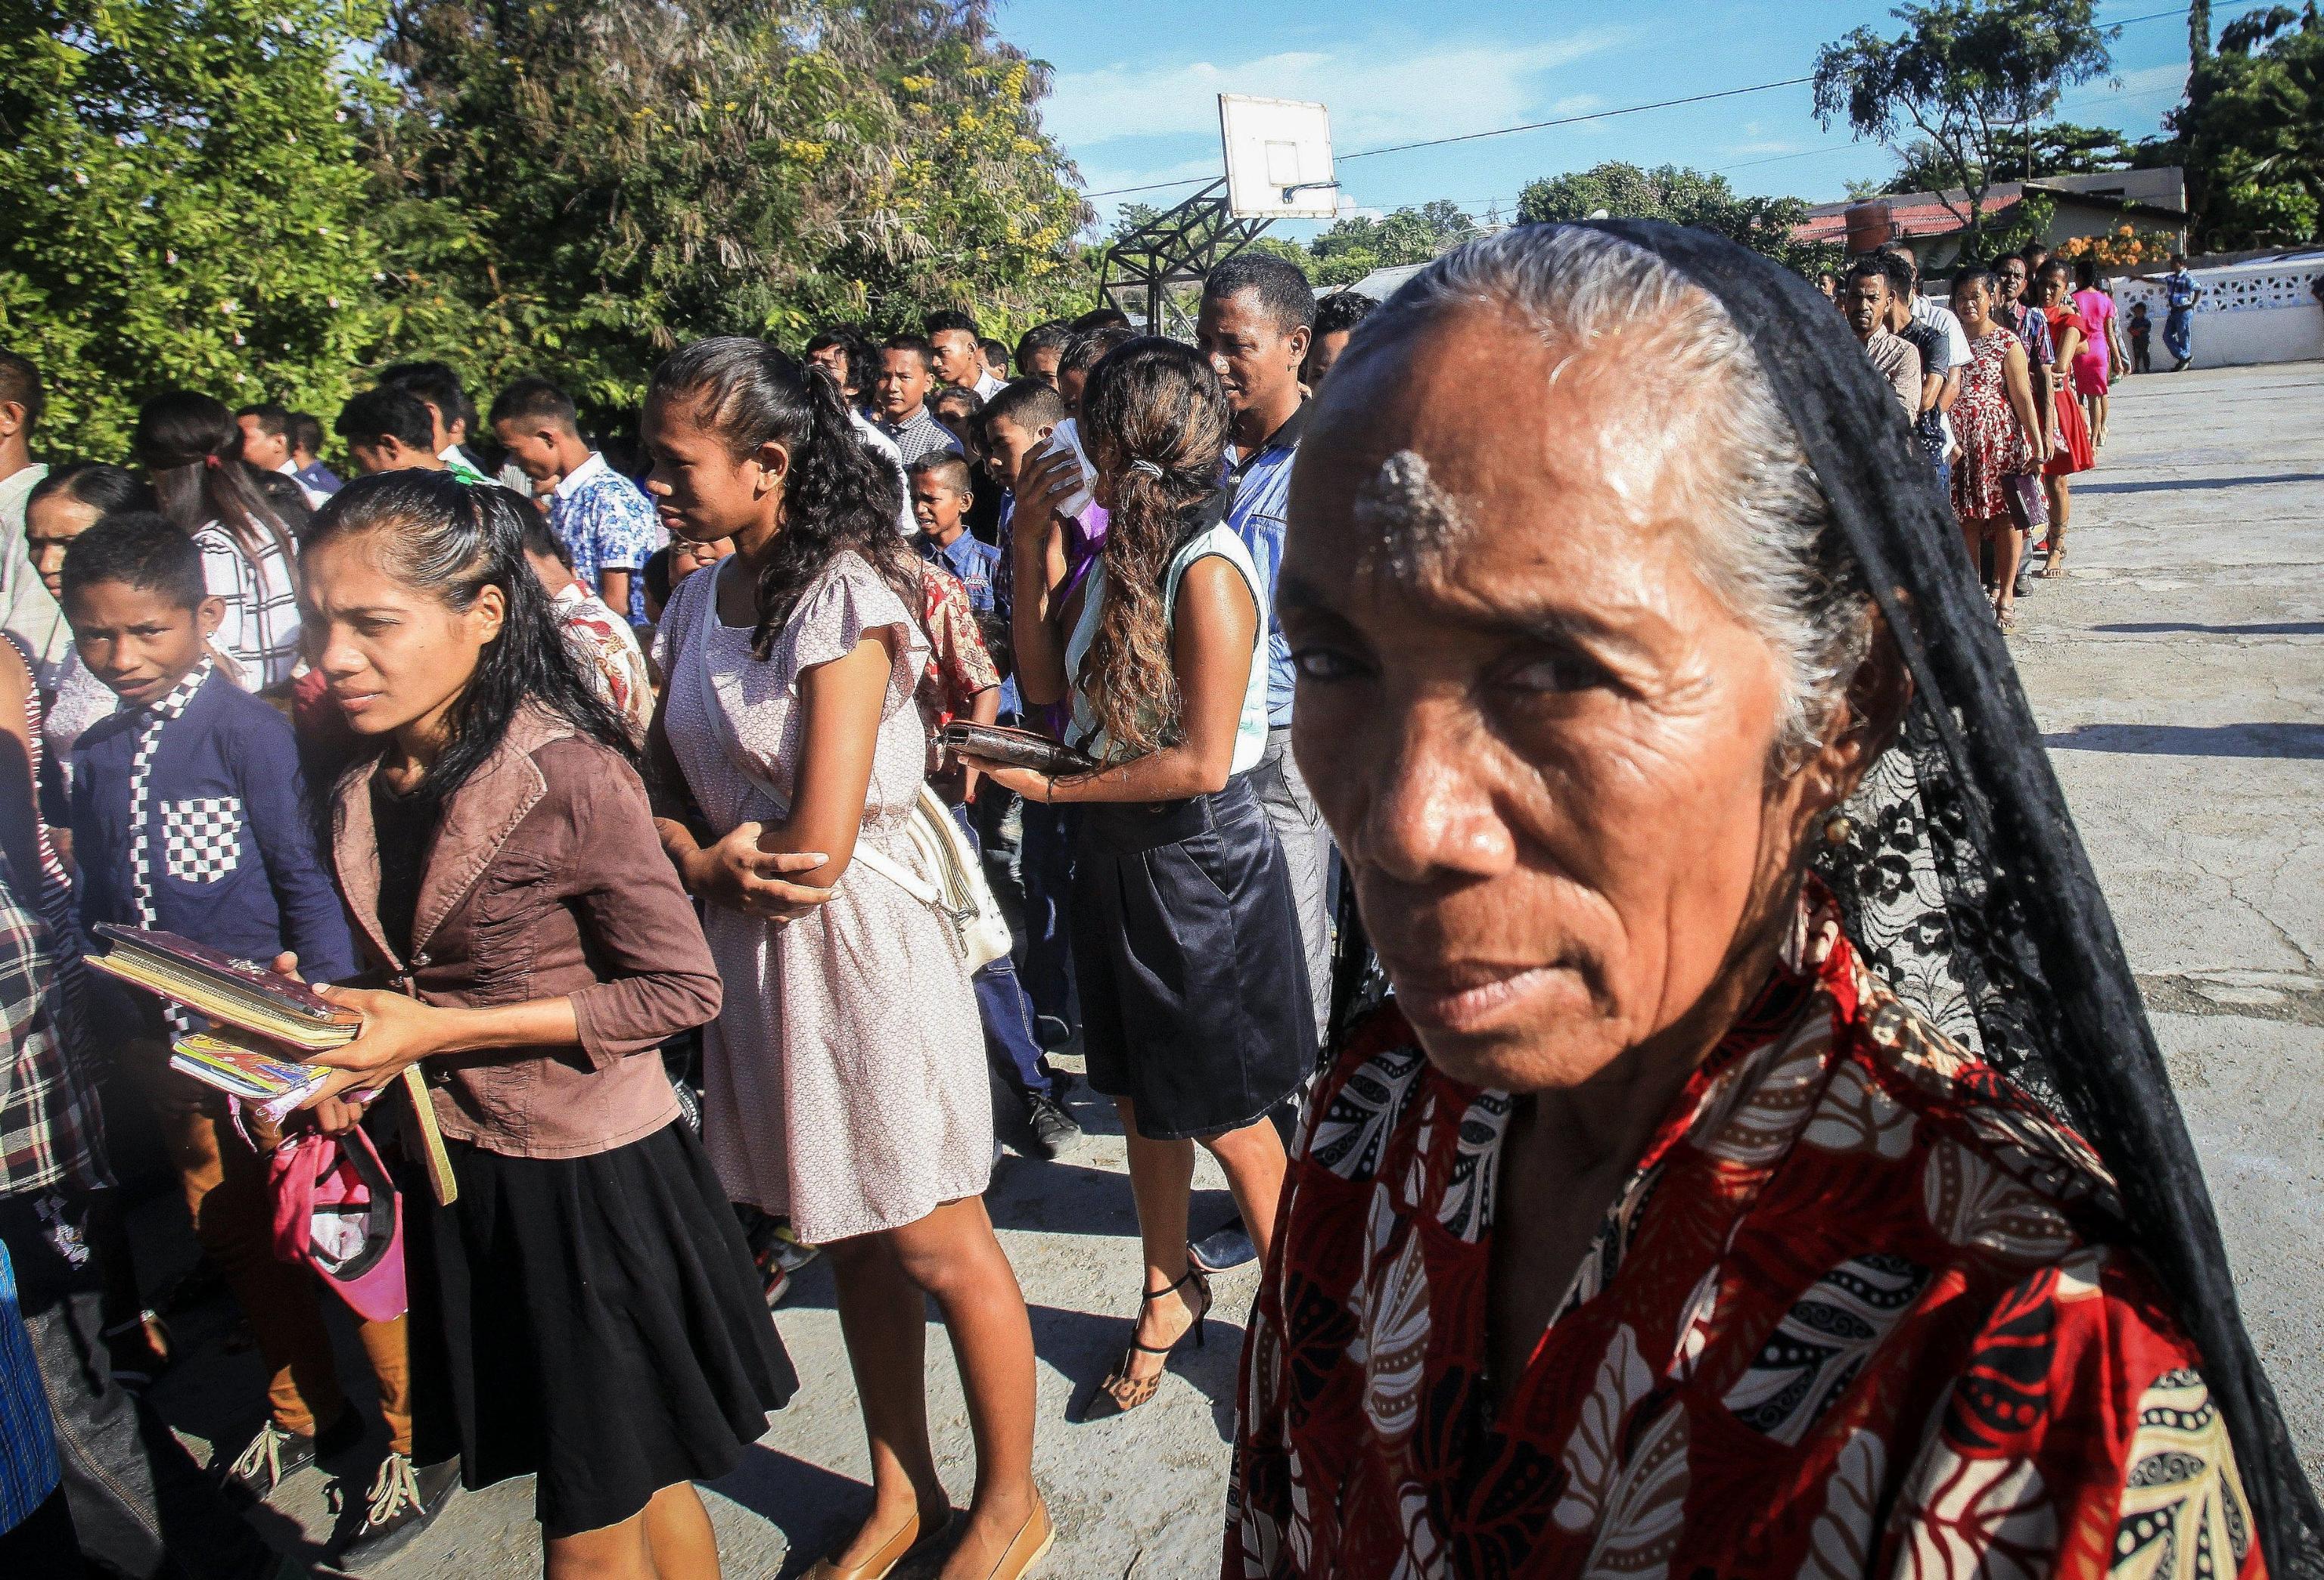 epa05822169 East Timorese Catholic worshippers line up to receive black soot marks on their foreheads as they observe Ash Wednesday at the Komoro Catholic church in Dili, East Timor, also known as Timor Leste, 01 March 2017. Ash Wednesday marks the beginning of the 40-day season of Lent in the Roman Catholic religion.  EPA/ANTONIO DASIPARU